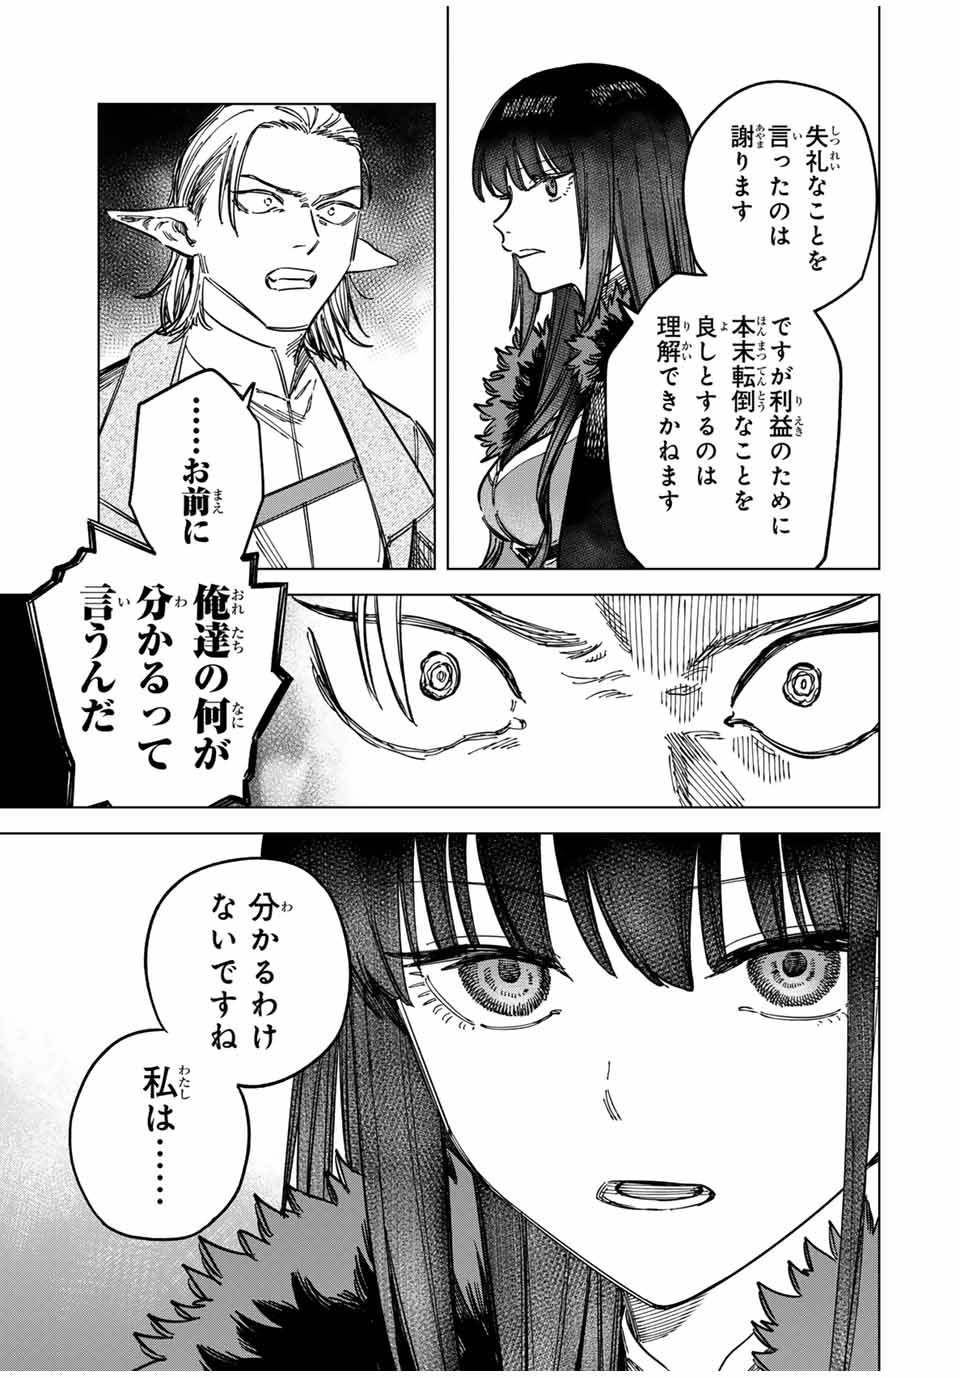 Witch and Mercenary 魔女と傭兵 第9.1話 - Page 5